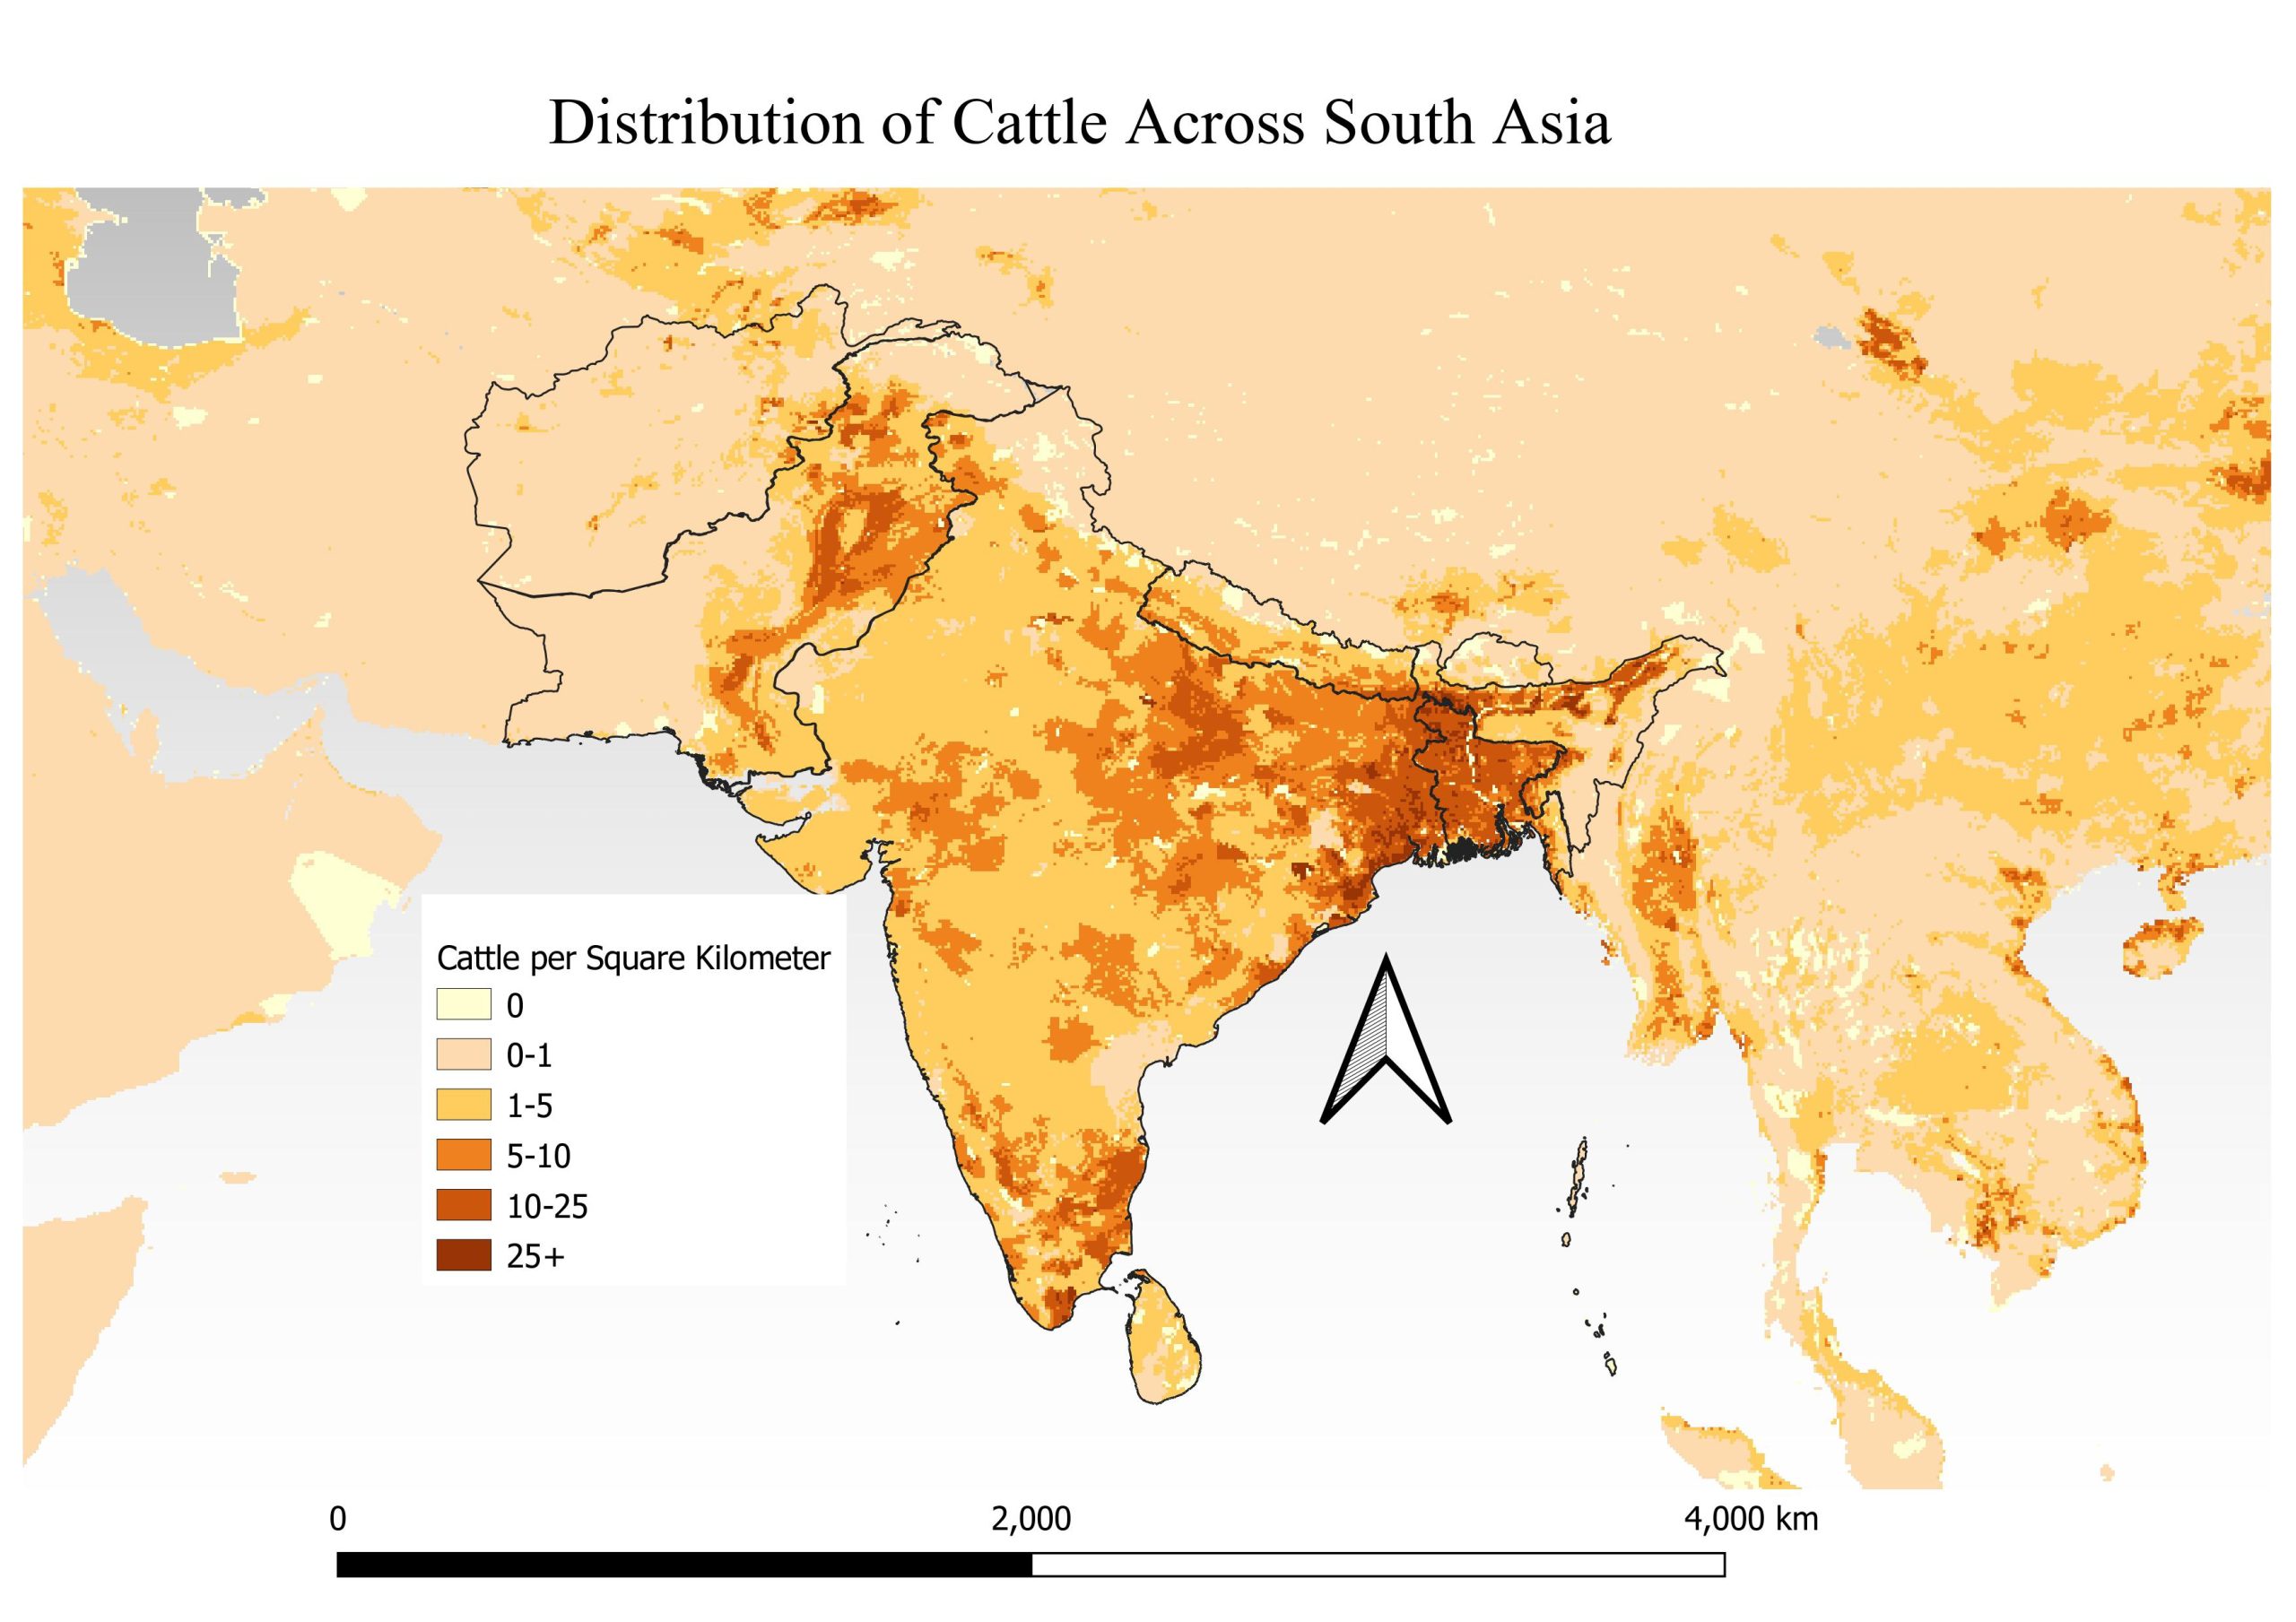 Map showing the distribution of cattle per sq. km in India and Pakistan, with the highest concentrations in Punjab and Sindh provinces in Pakistan, and West Bengal, Jharkhand, Bihar, Assam and Uttar Pradesh states in India